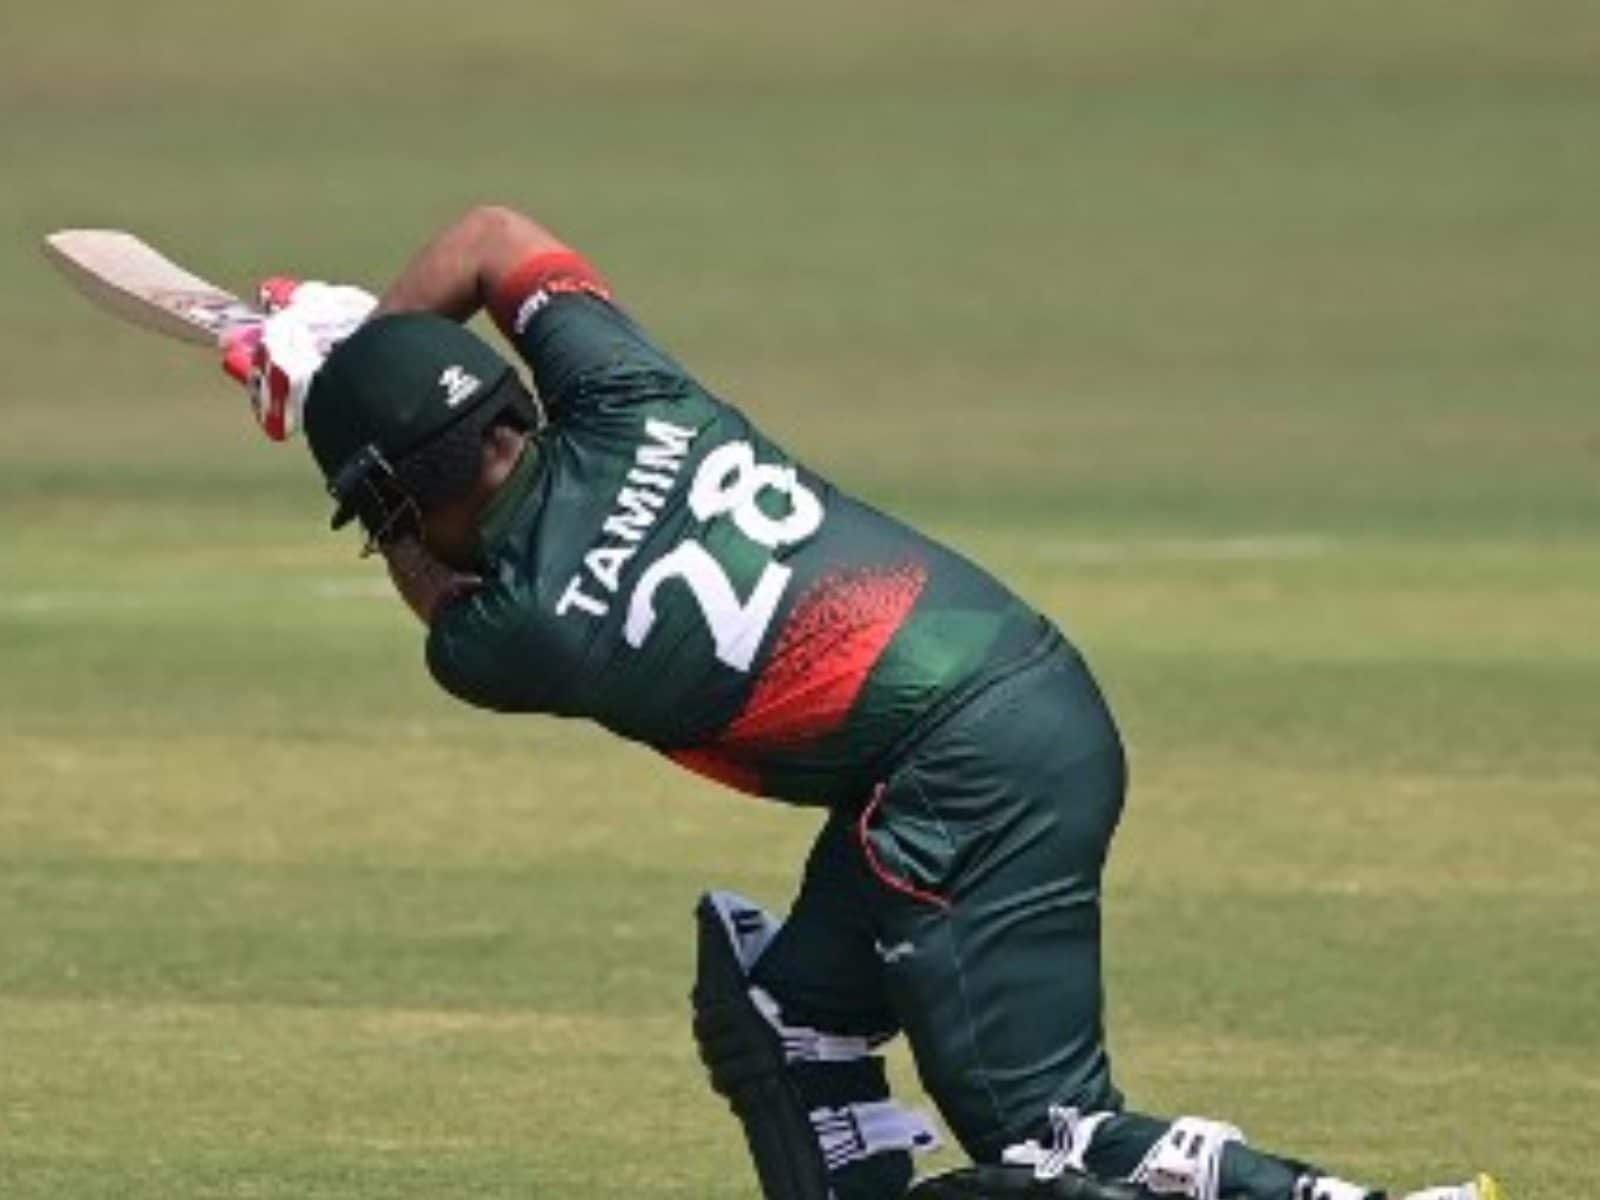 South Africa vs Bangladesh Live Streaming When and Where to Watch 1st ODI Live Coverage on Live TV Online